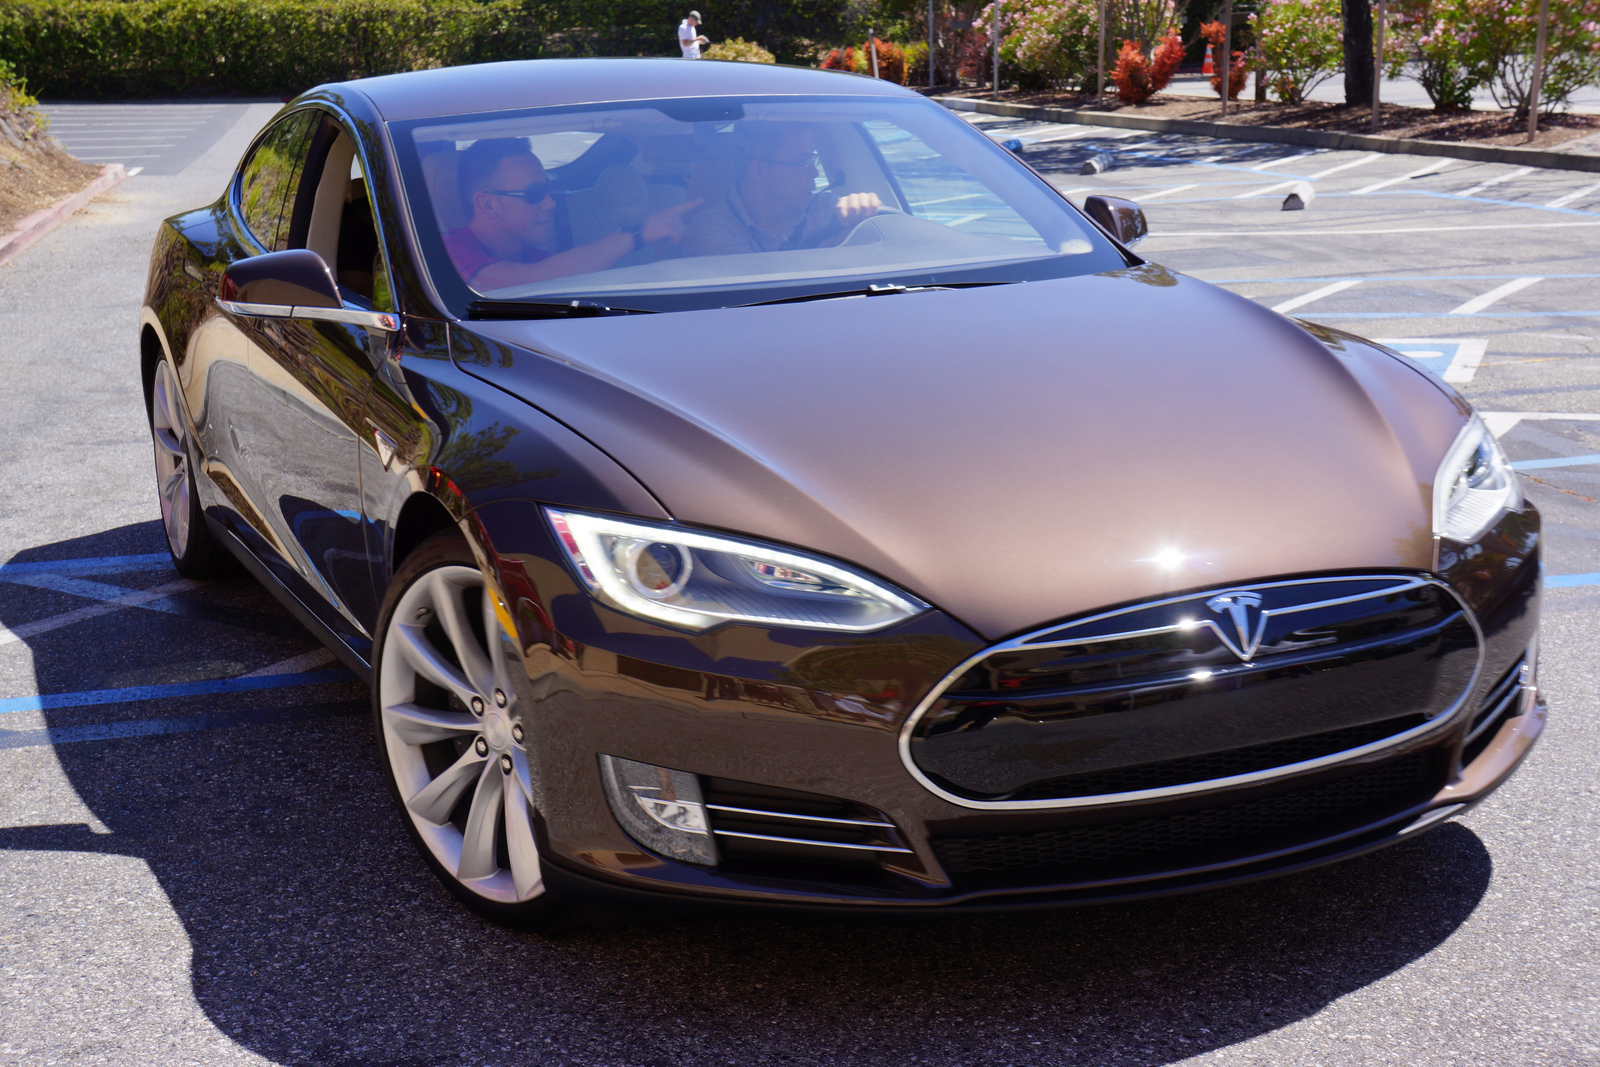 Tesla Model S Certified Used Electric Cars: Now On Sale Online